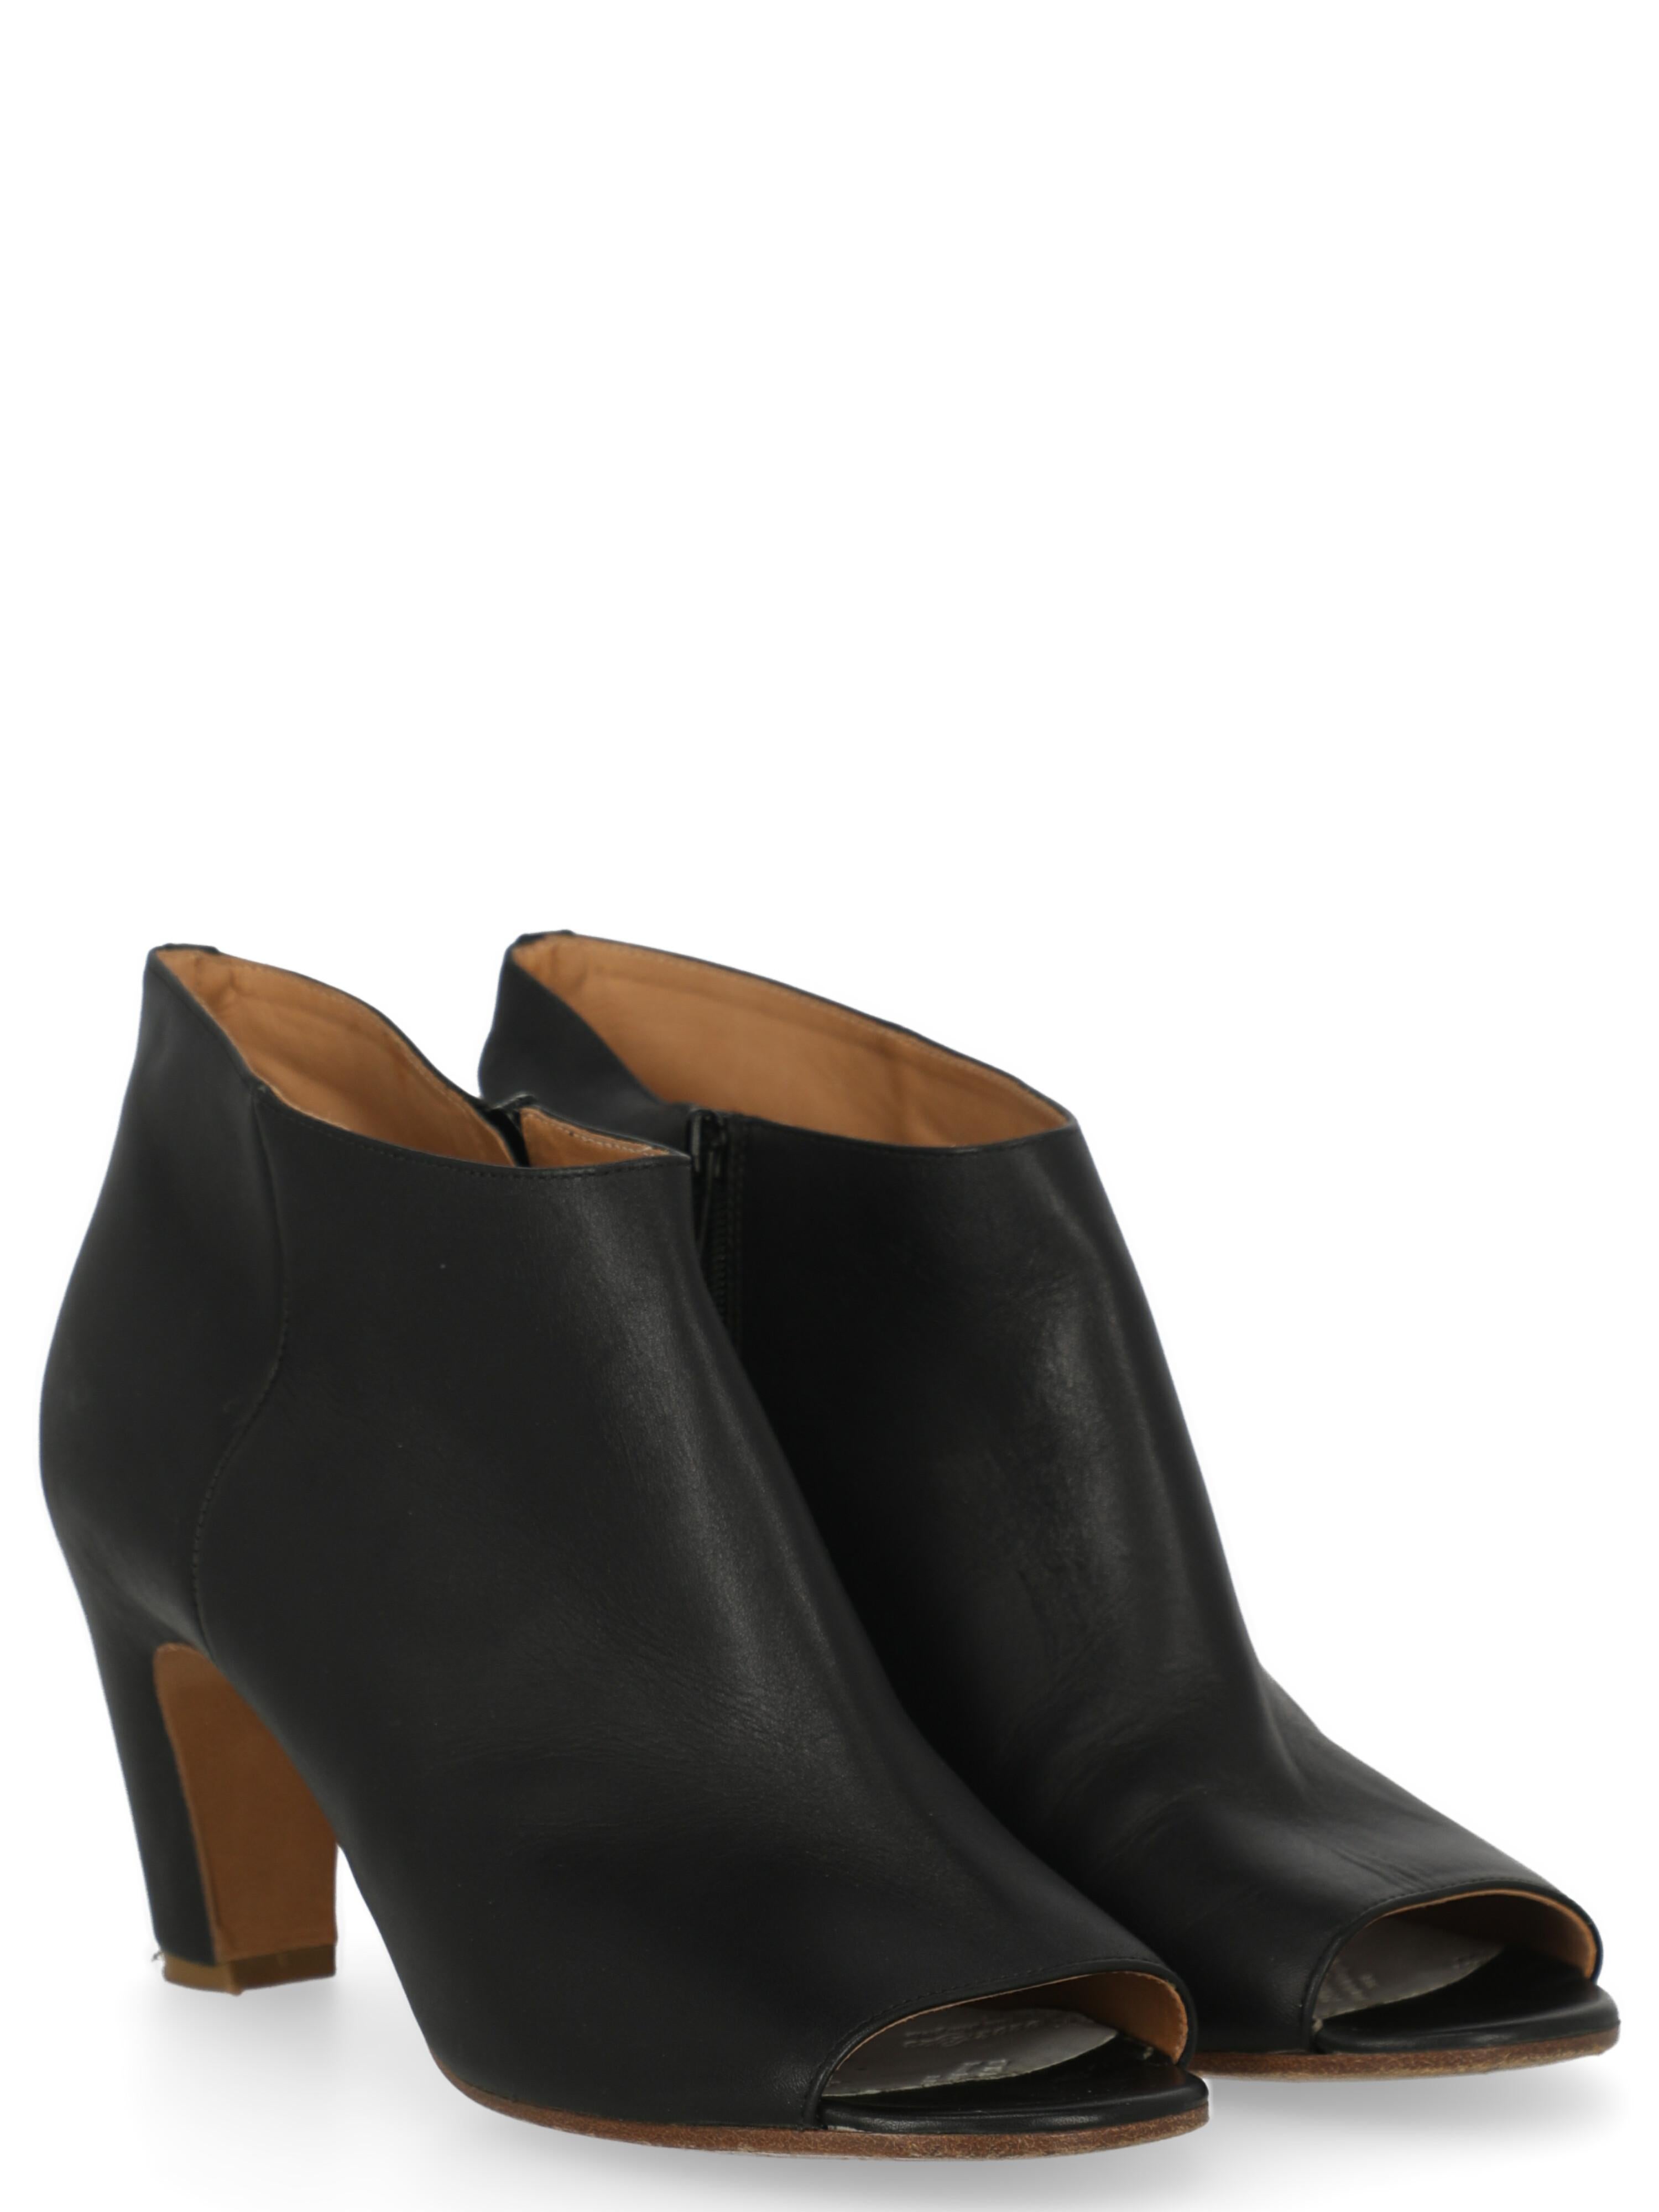 Product Description: Ankle boots, leather, solid color, side fastening, open toe, branded insole, block heel, mid heel

Includes: N/A

Product Condition: Very Good
Heel: negligible marks. Sole: visible signs of use. Upper: negligible scratches,